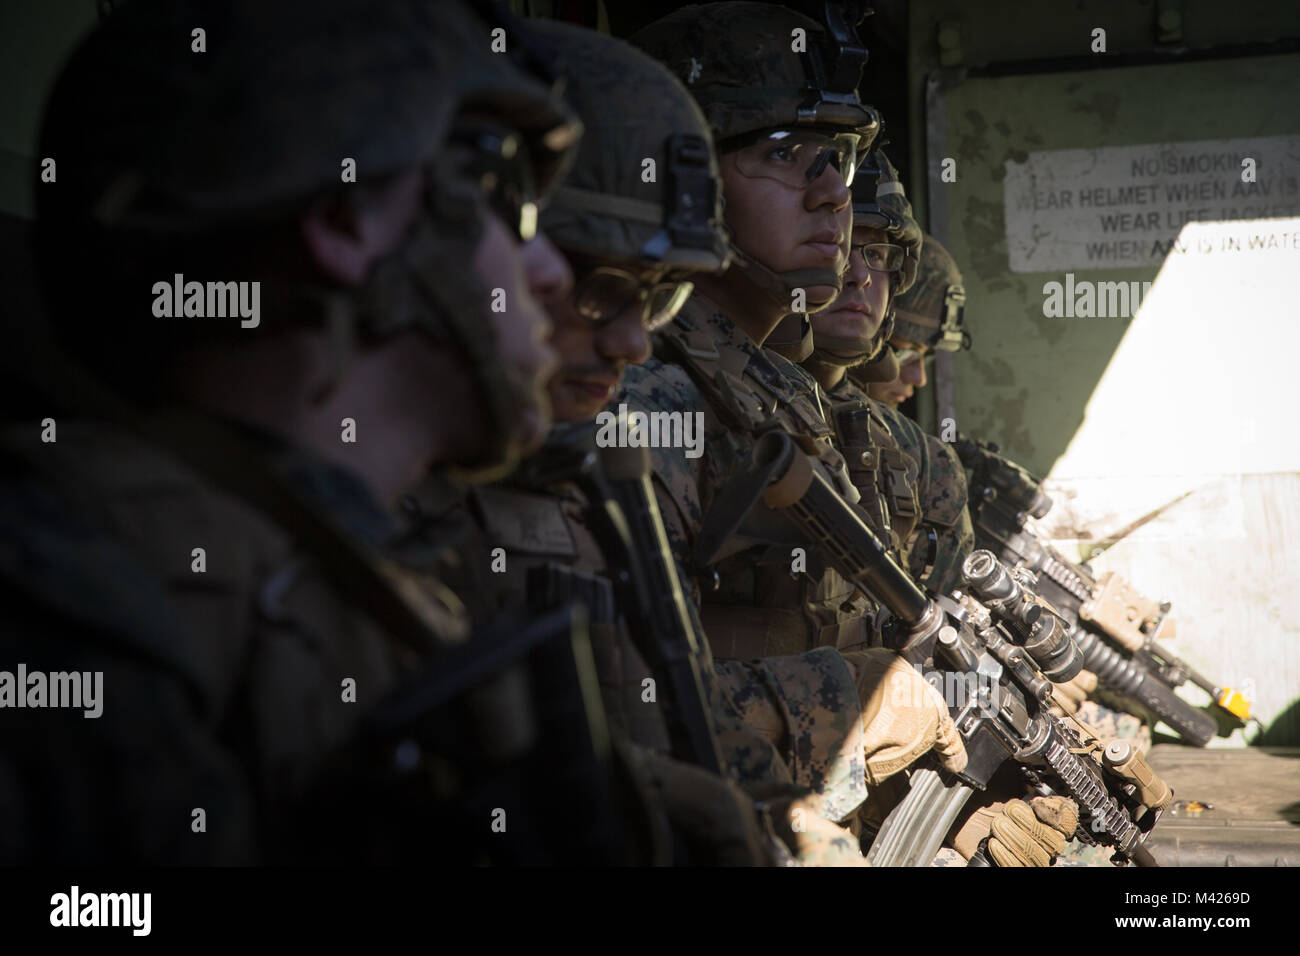 U.S. Marines with Kilo Company, Battalion Landing Team (BLT), 3rd Battalion, 1st Marine Regiment prepare for an assault exercise on Camp Pendleton, California, Jan. 31, 2018. BLT 3/1 is refining tactics, techniques, and procedures applicable to raid operations in order to enhance their ability to conduct expeditionary operations while deployed. (U.S. Marine Corps photo by Cpl. Danny Gonzalez) Stock Photo